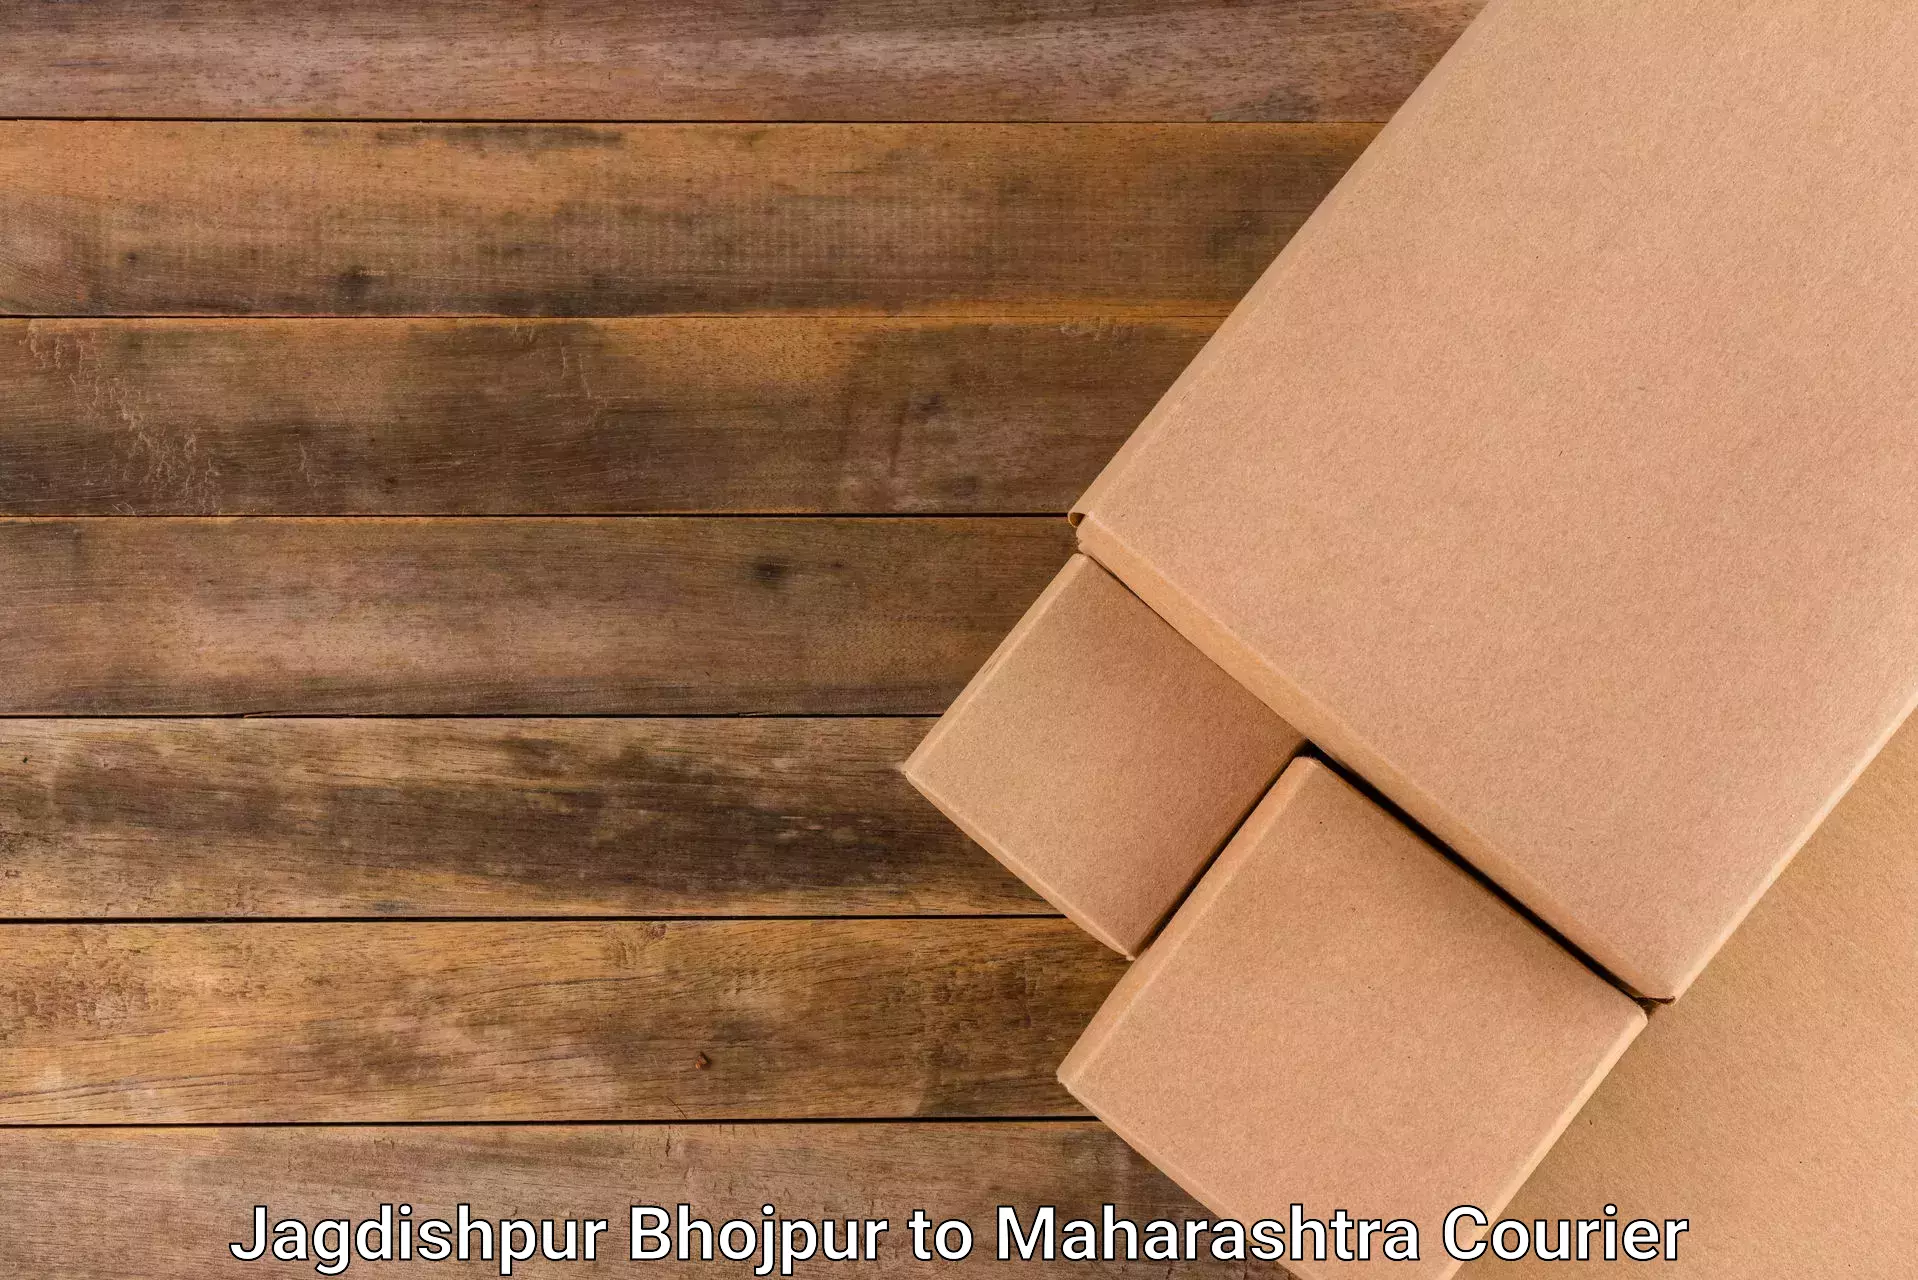 24/7 courier service in Jagdishpur Bhojpur to Mudal